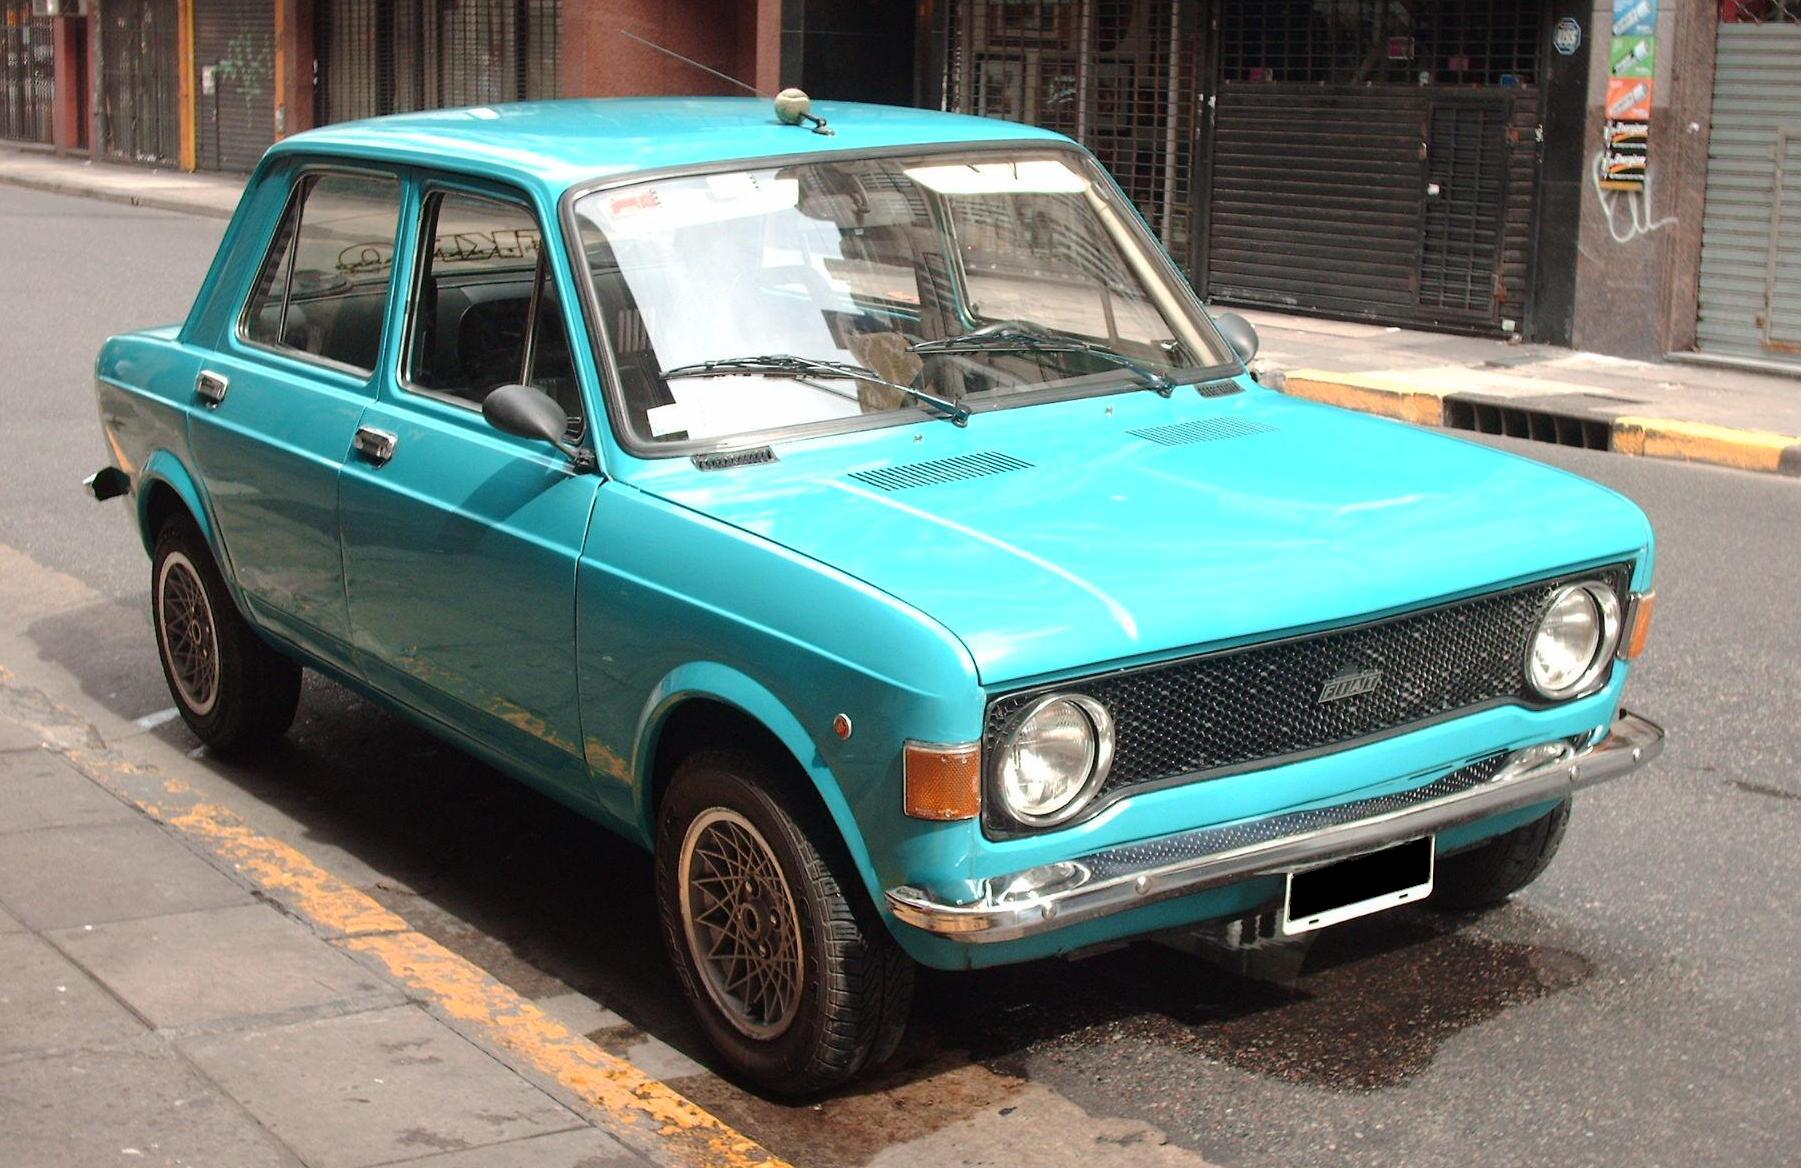 Fiat 128 Information And Photos MOMENTcar